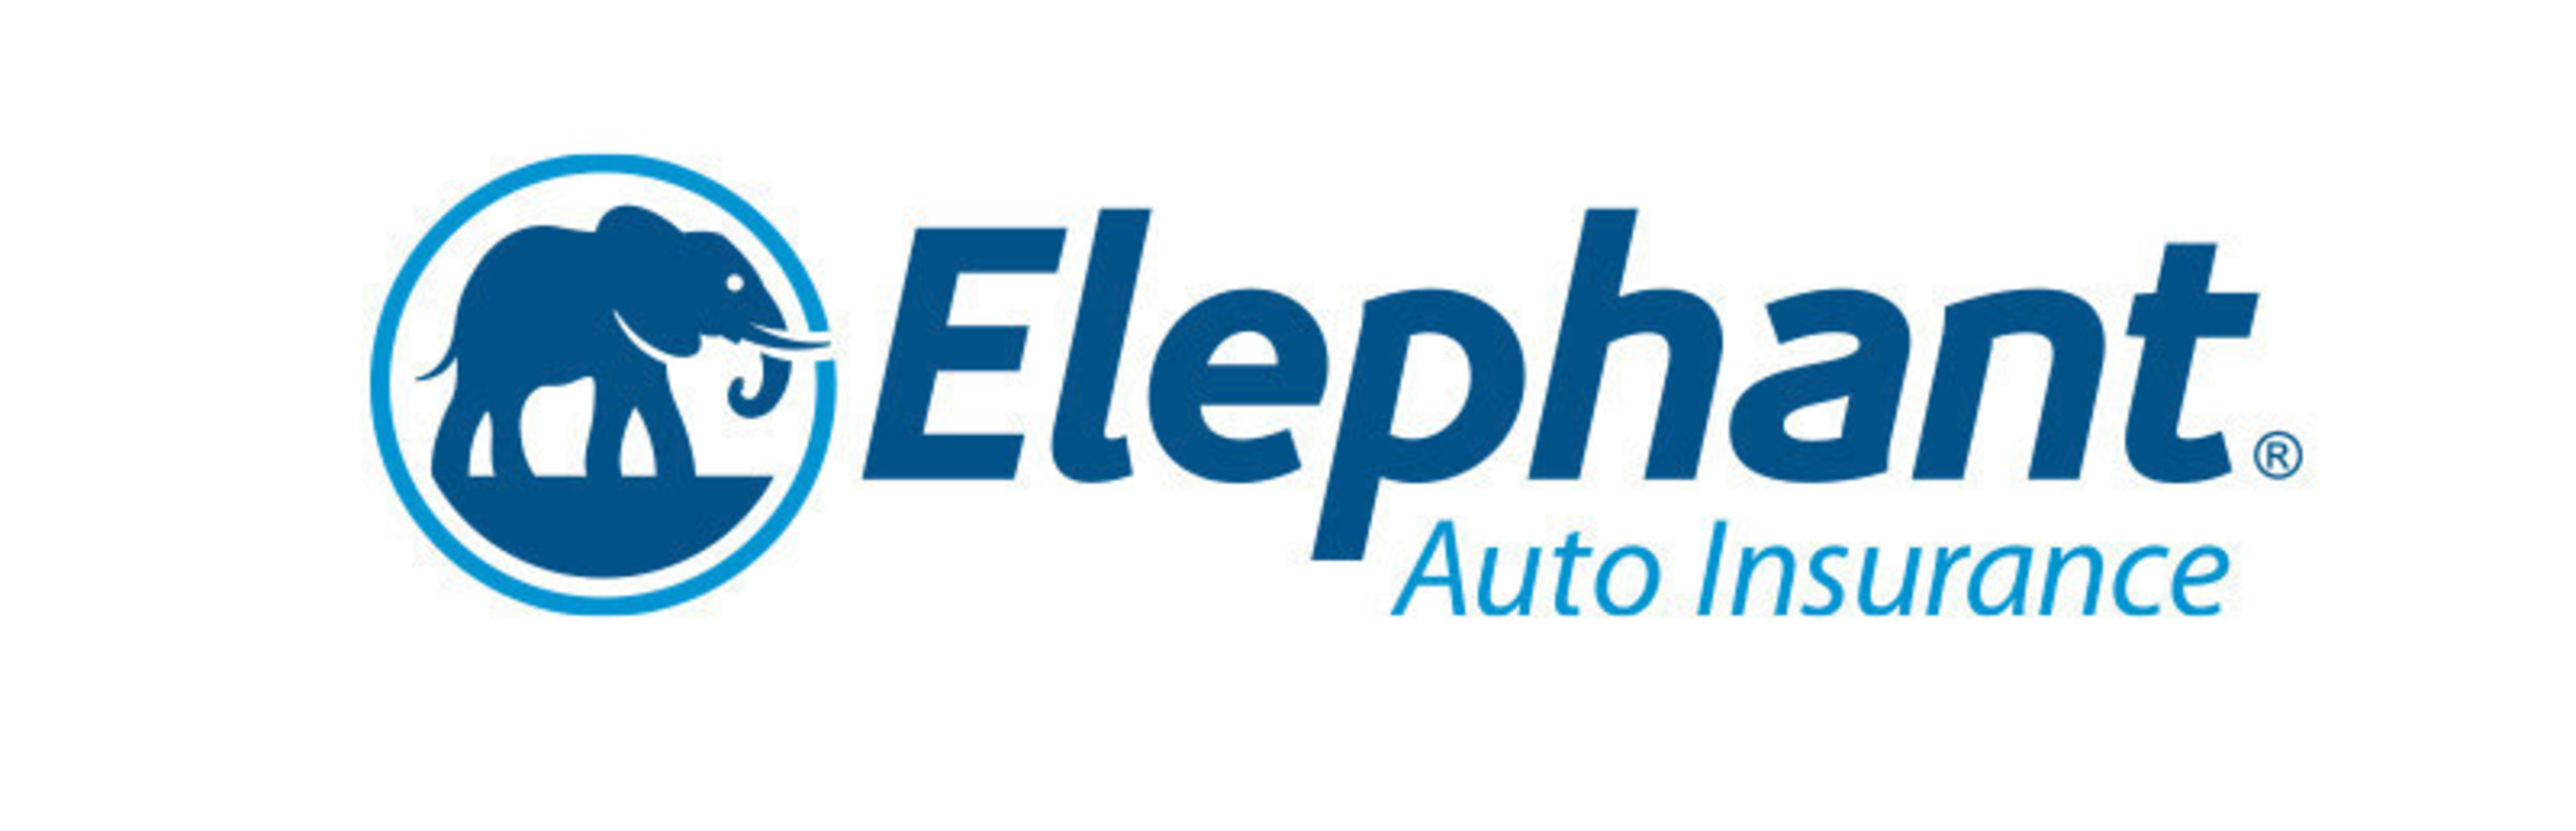 Elephant Auto Insurance expands into Tennessee and Indiana